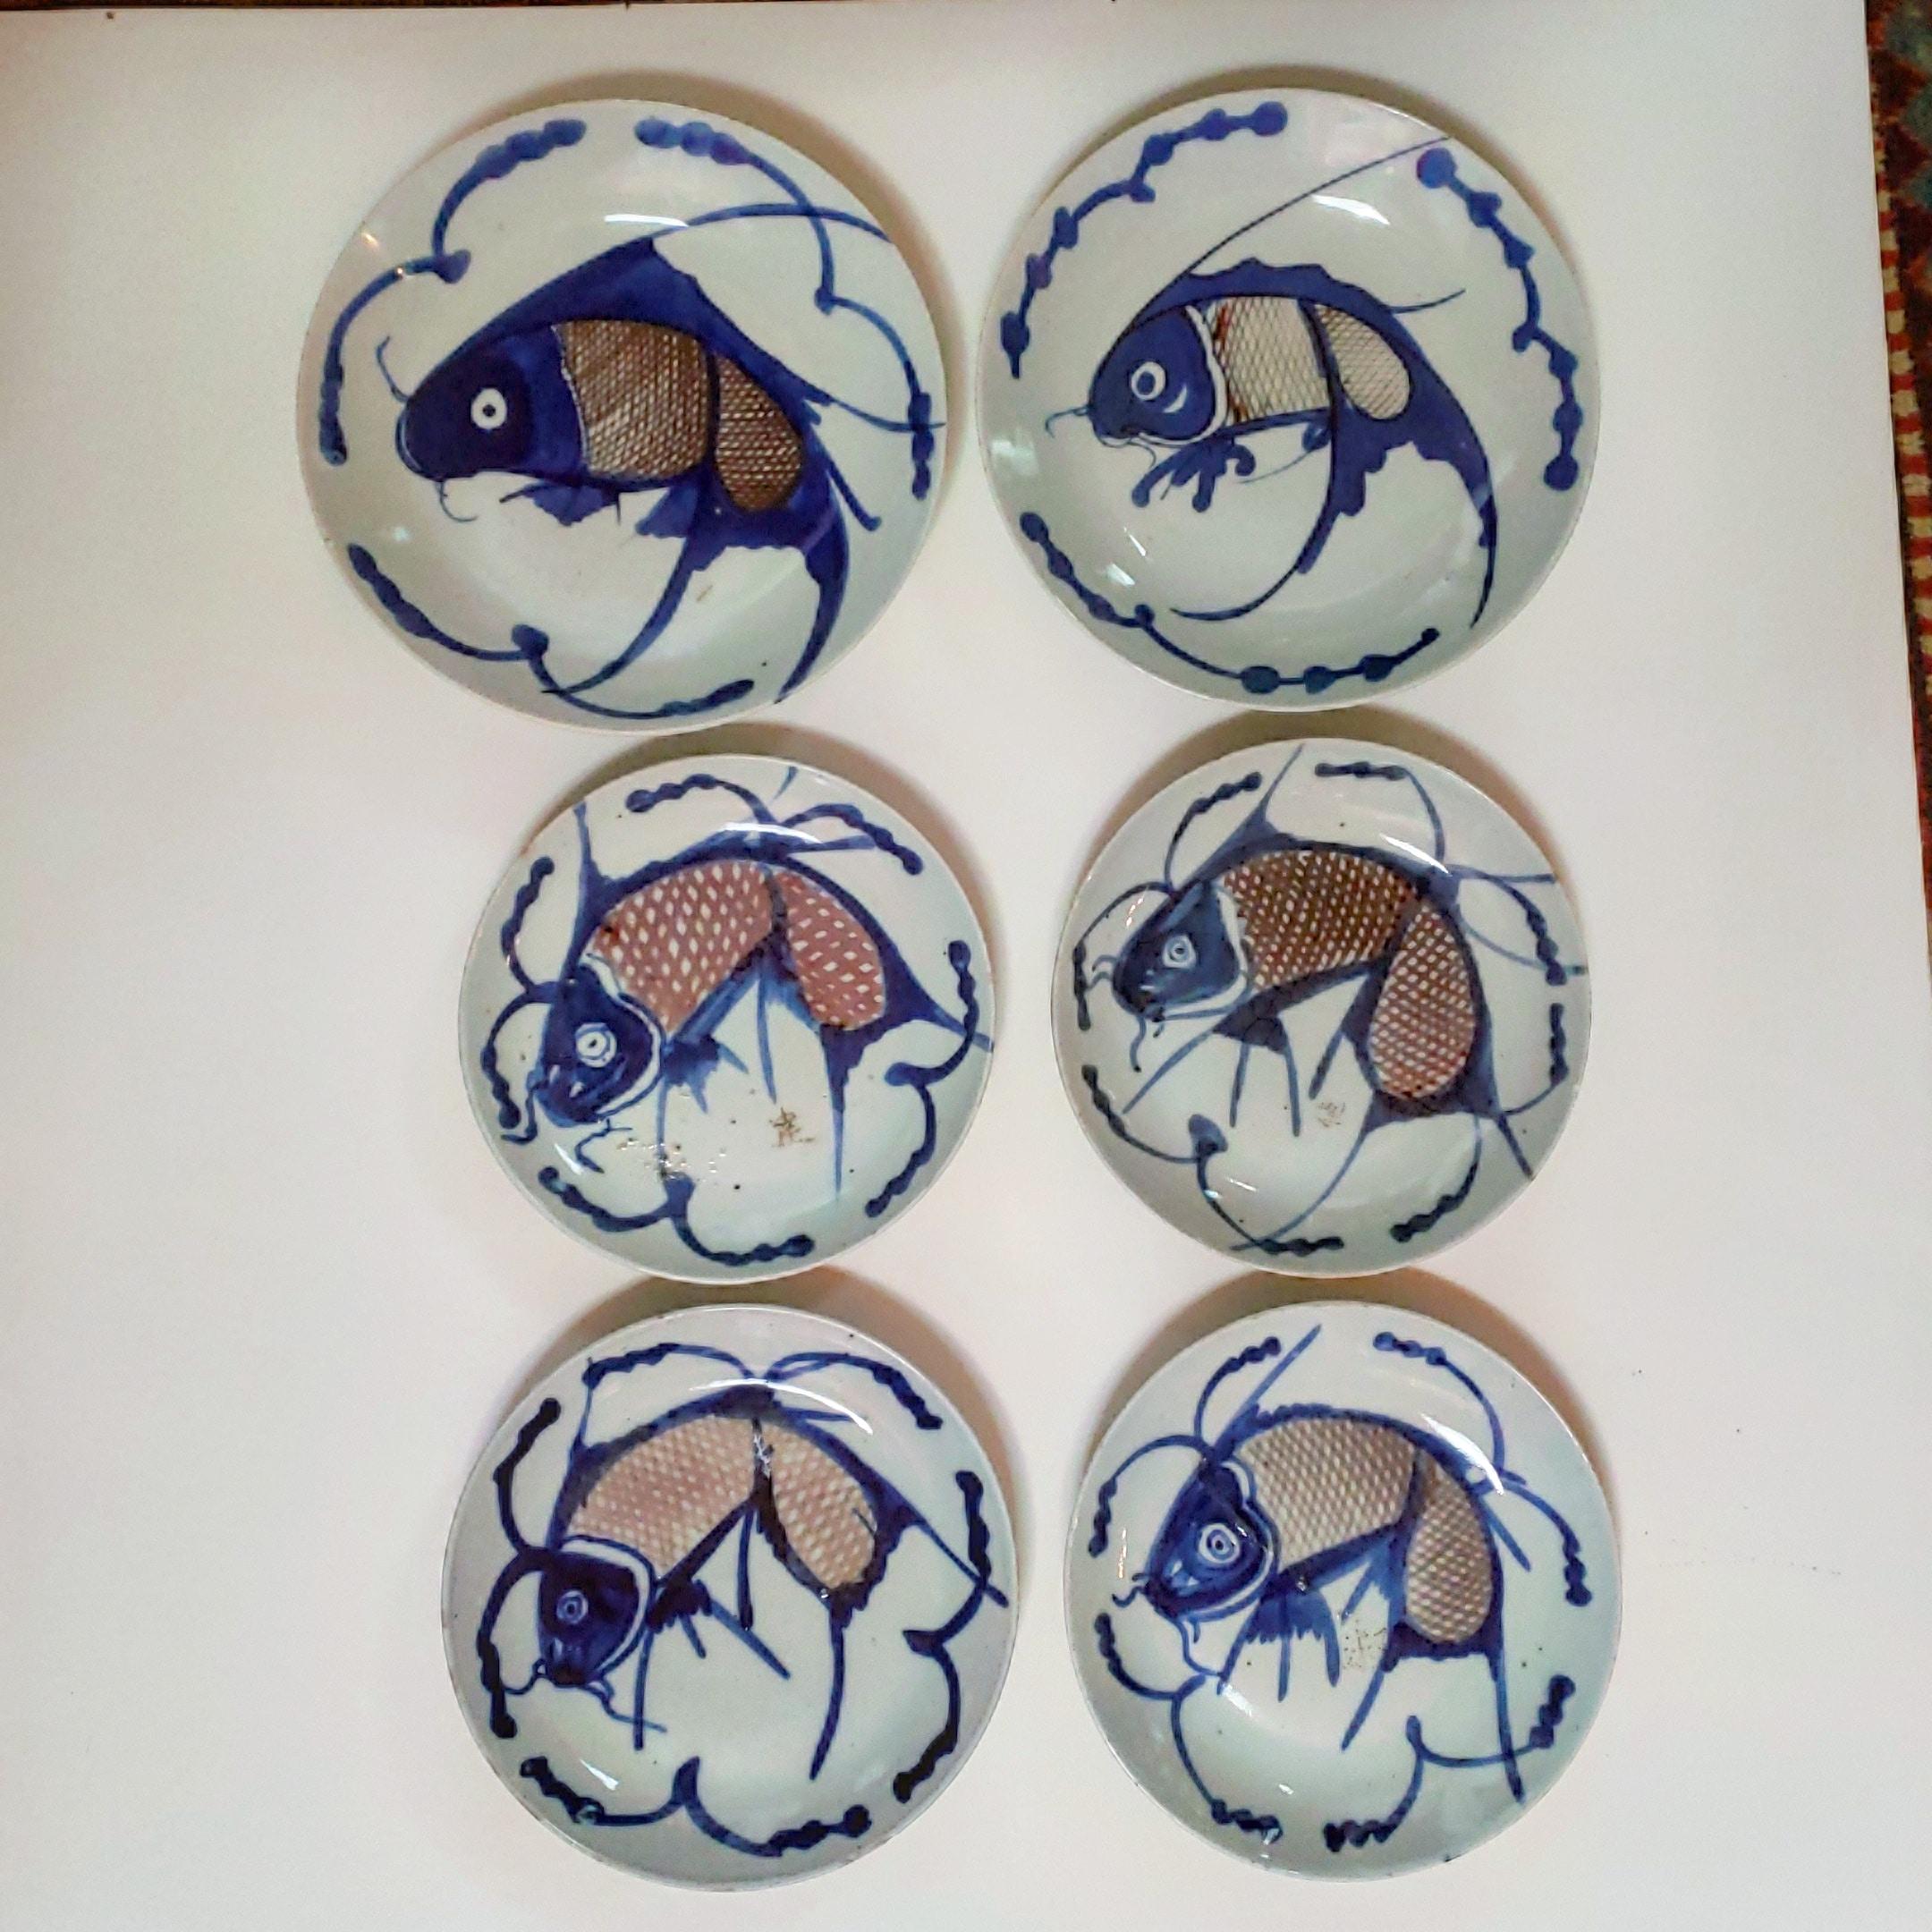 6 vividly decorated porcelain carp plates in blue and purple glaze on a blue-tinted clear glaze ground. These plates are were often seen on the tables of rural China. These bowl-like plates exhibit arrestingly bold stylized leaping carp, energized